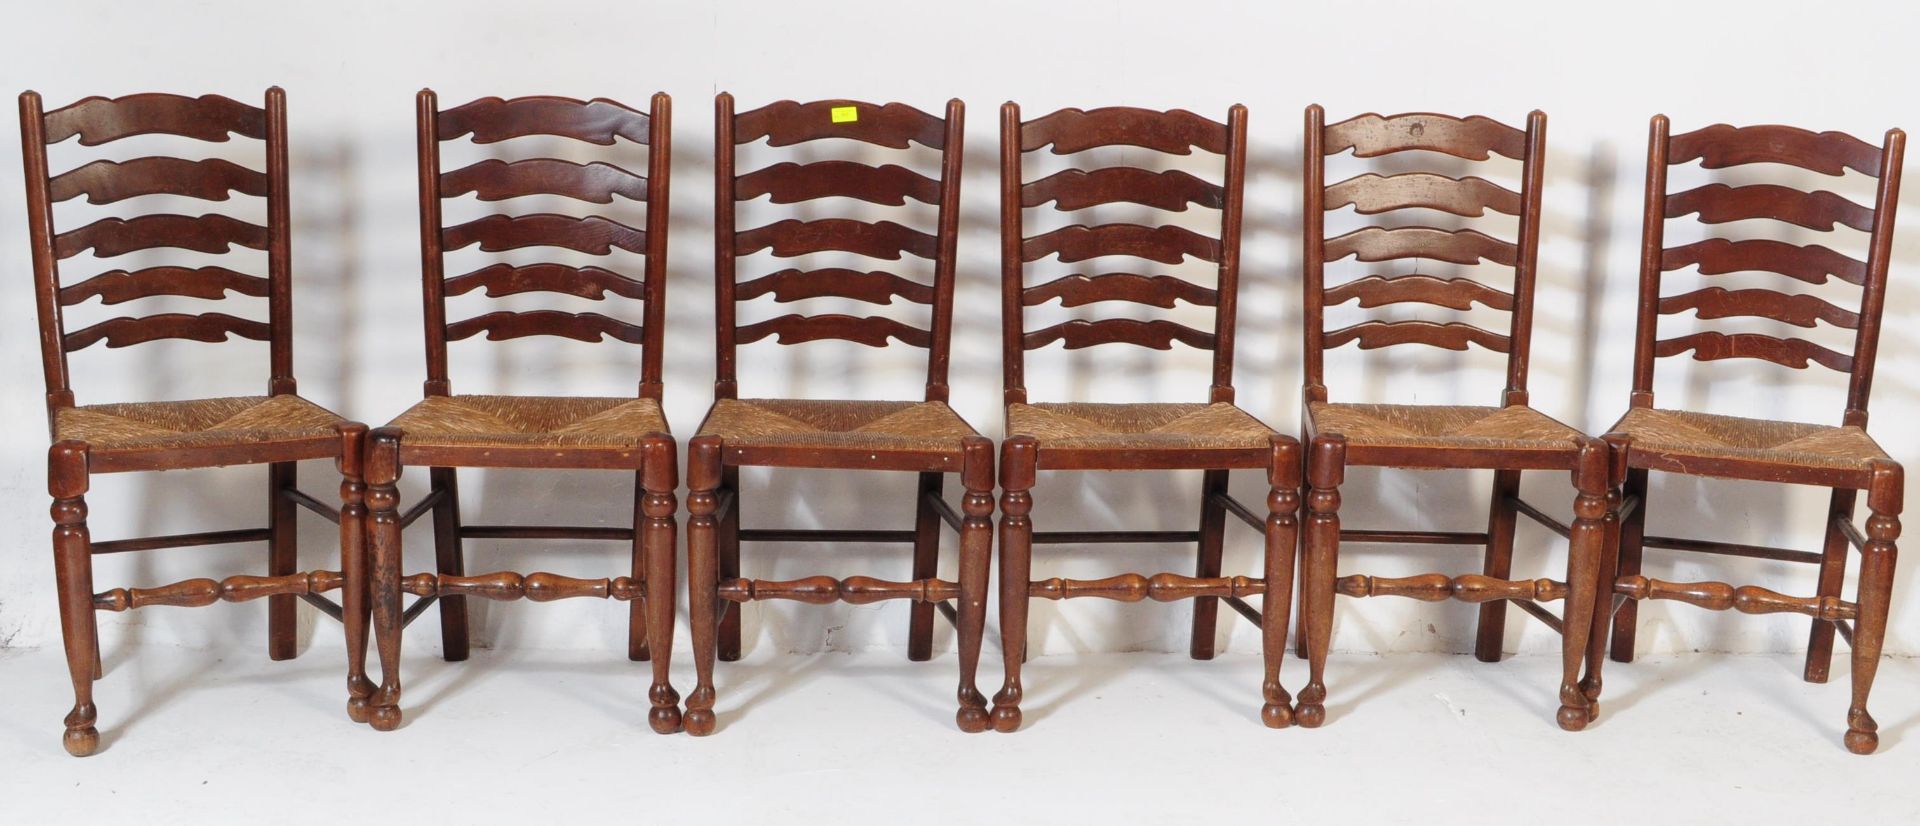 GROUP OF SIX 20TH CENTURY OAK LADDER BACK DINING CHAIRS - Image 2 of 5